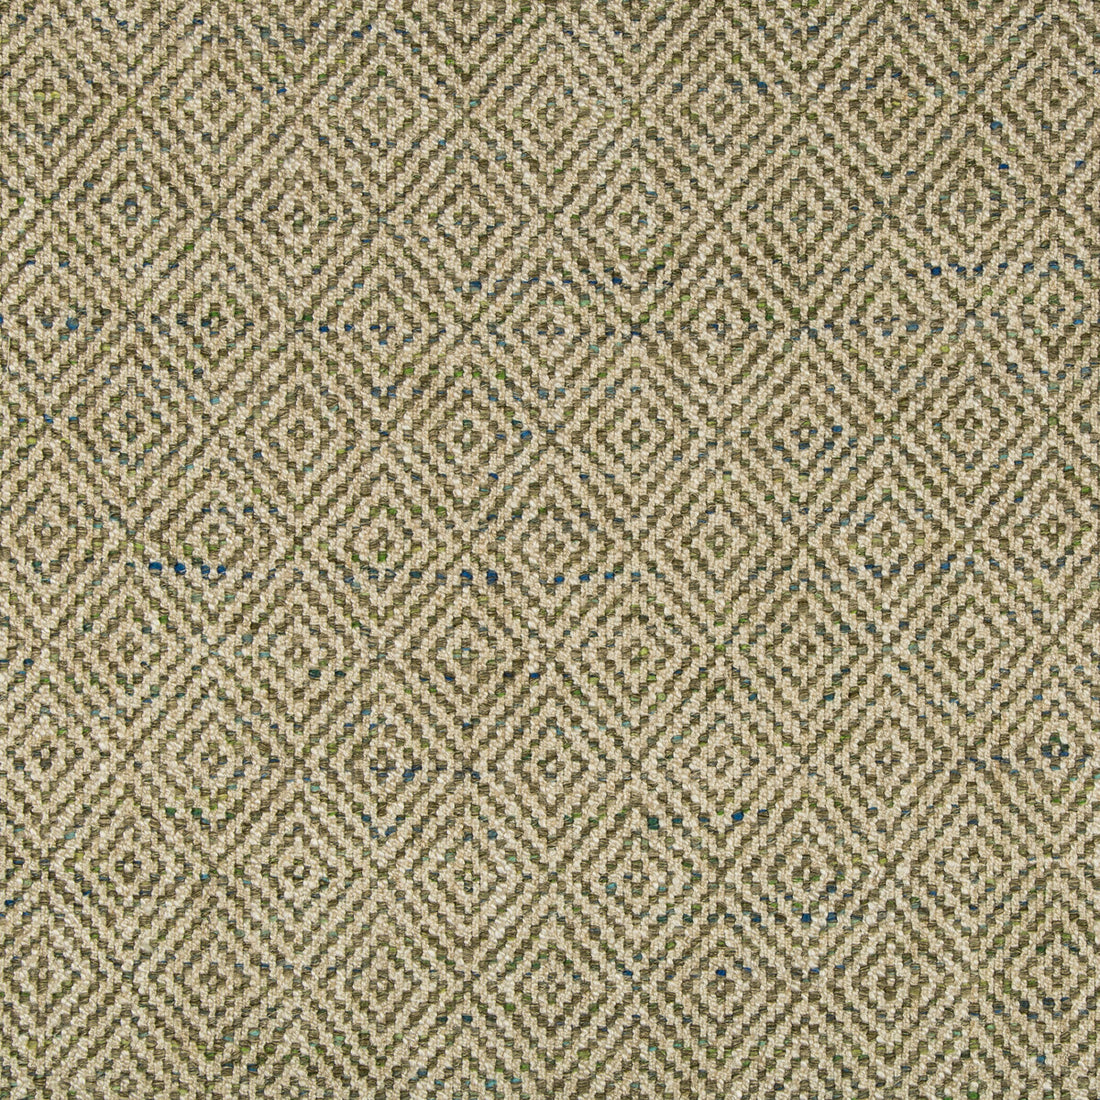 Izu fabric in green tea color - pattern 35446.316.0 - by Kravet Couture in the Izu Collection collection